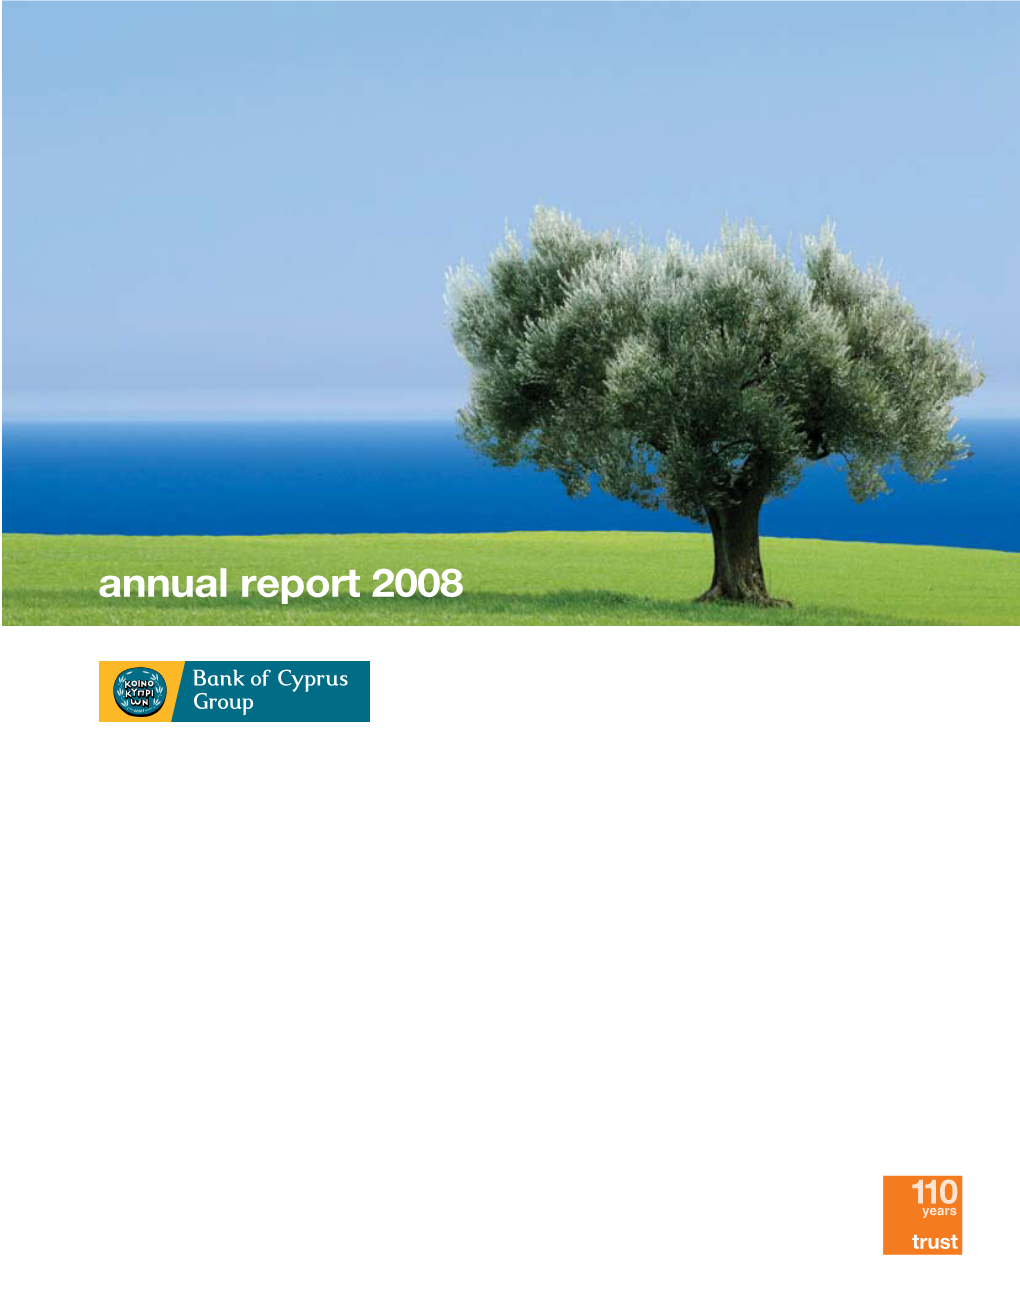 Annual Report 2008 Bank of Cyprus Group / / Group Cyprus of Bank Annual Report 2008 Report Annual